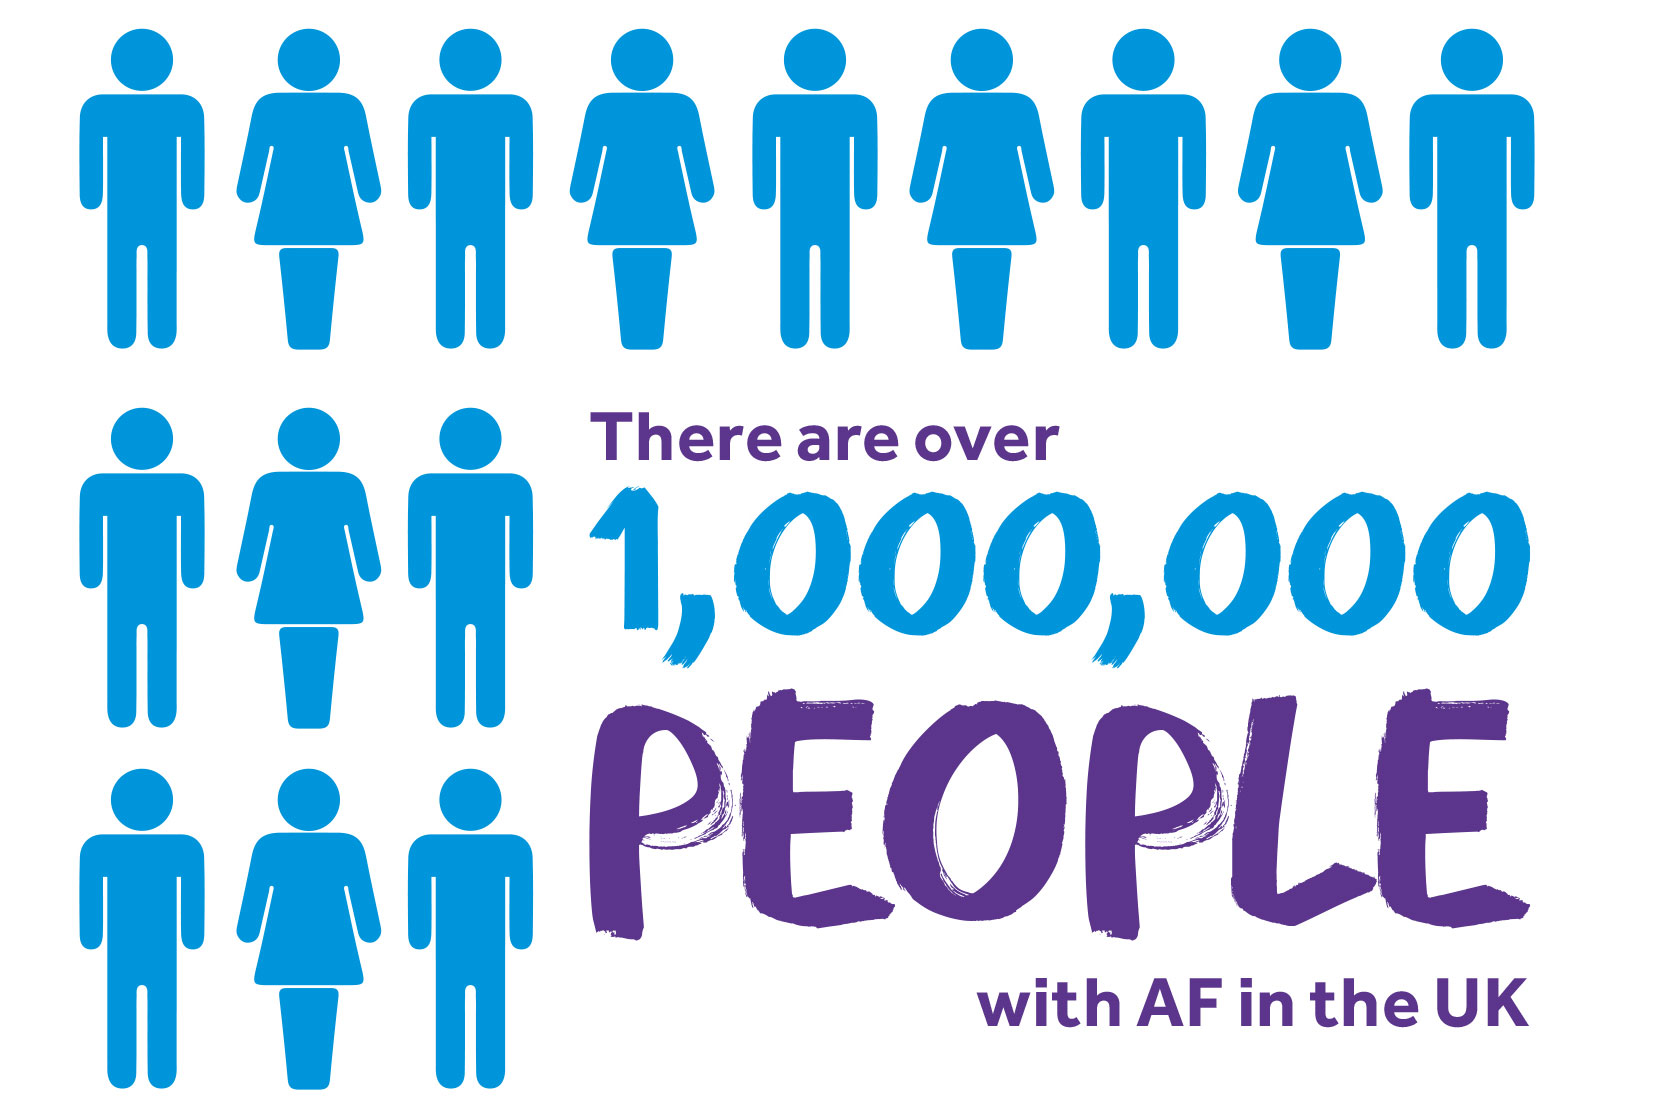 Large stat saying that there are over 1 million people with Atrial fibrillation in the UK